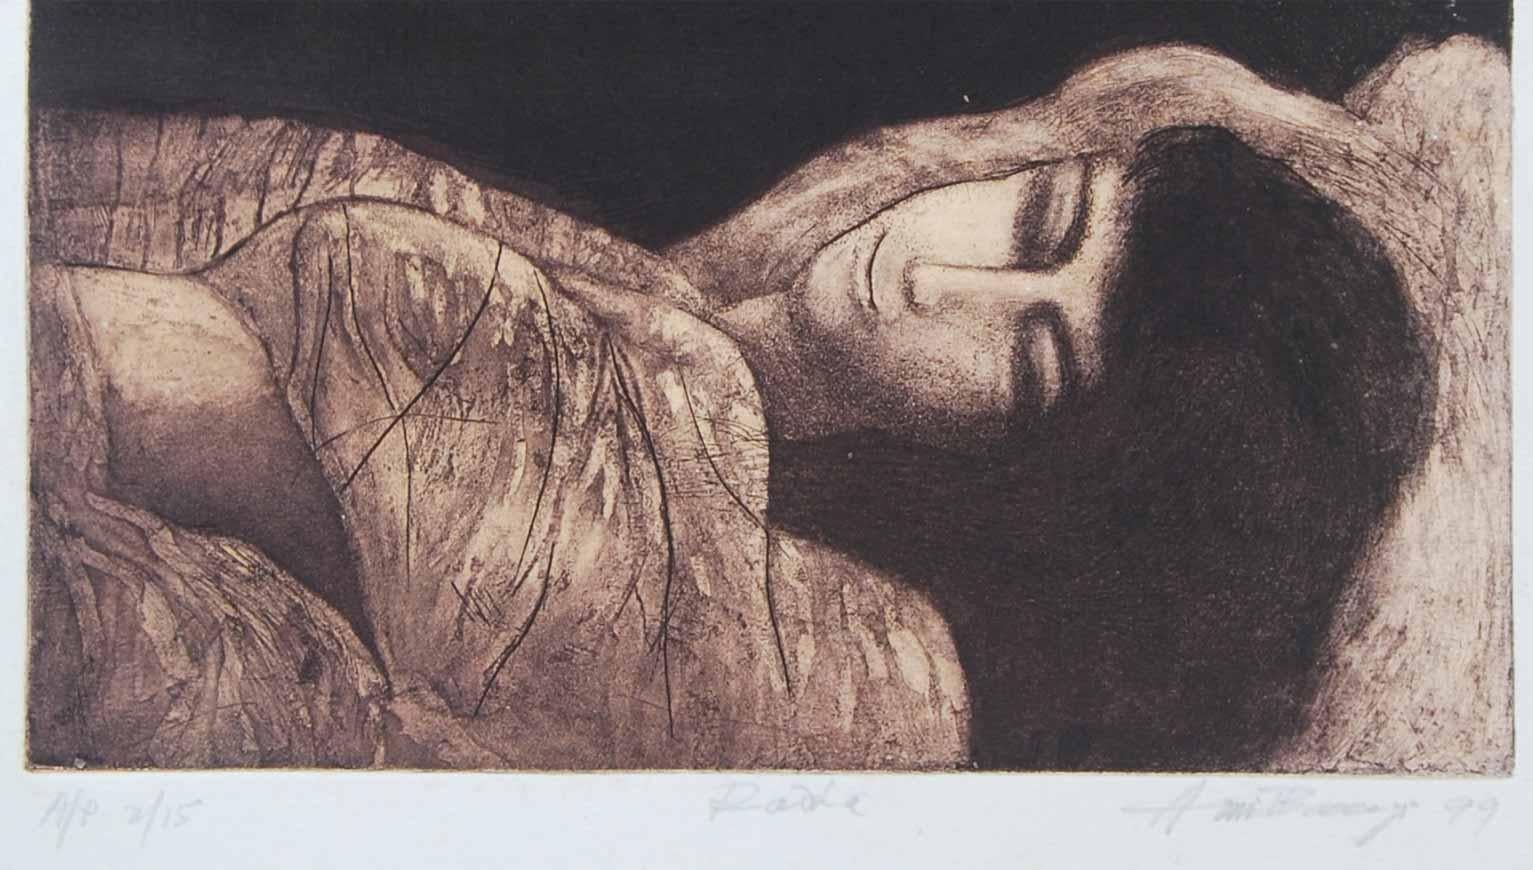 Amitabha Banerjee - Radha - 19 x 22 inches ( unframed size)
Etching on paper
Inclusive of shipment in roll form.

About the Artist and his work :
Born : In 1929 born in Barisal, Bangladesh.
Education :
1948 - Amitabha Banerjee studied at the